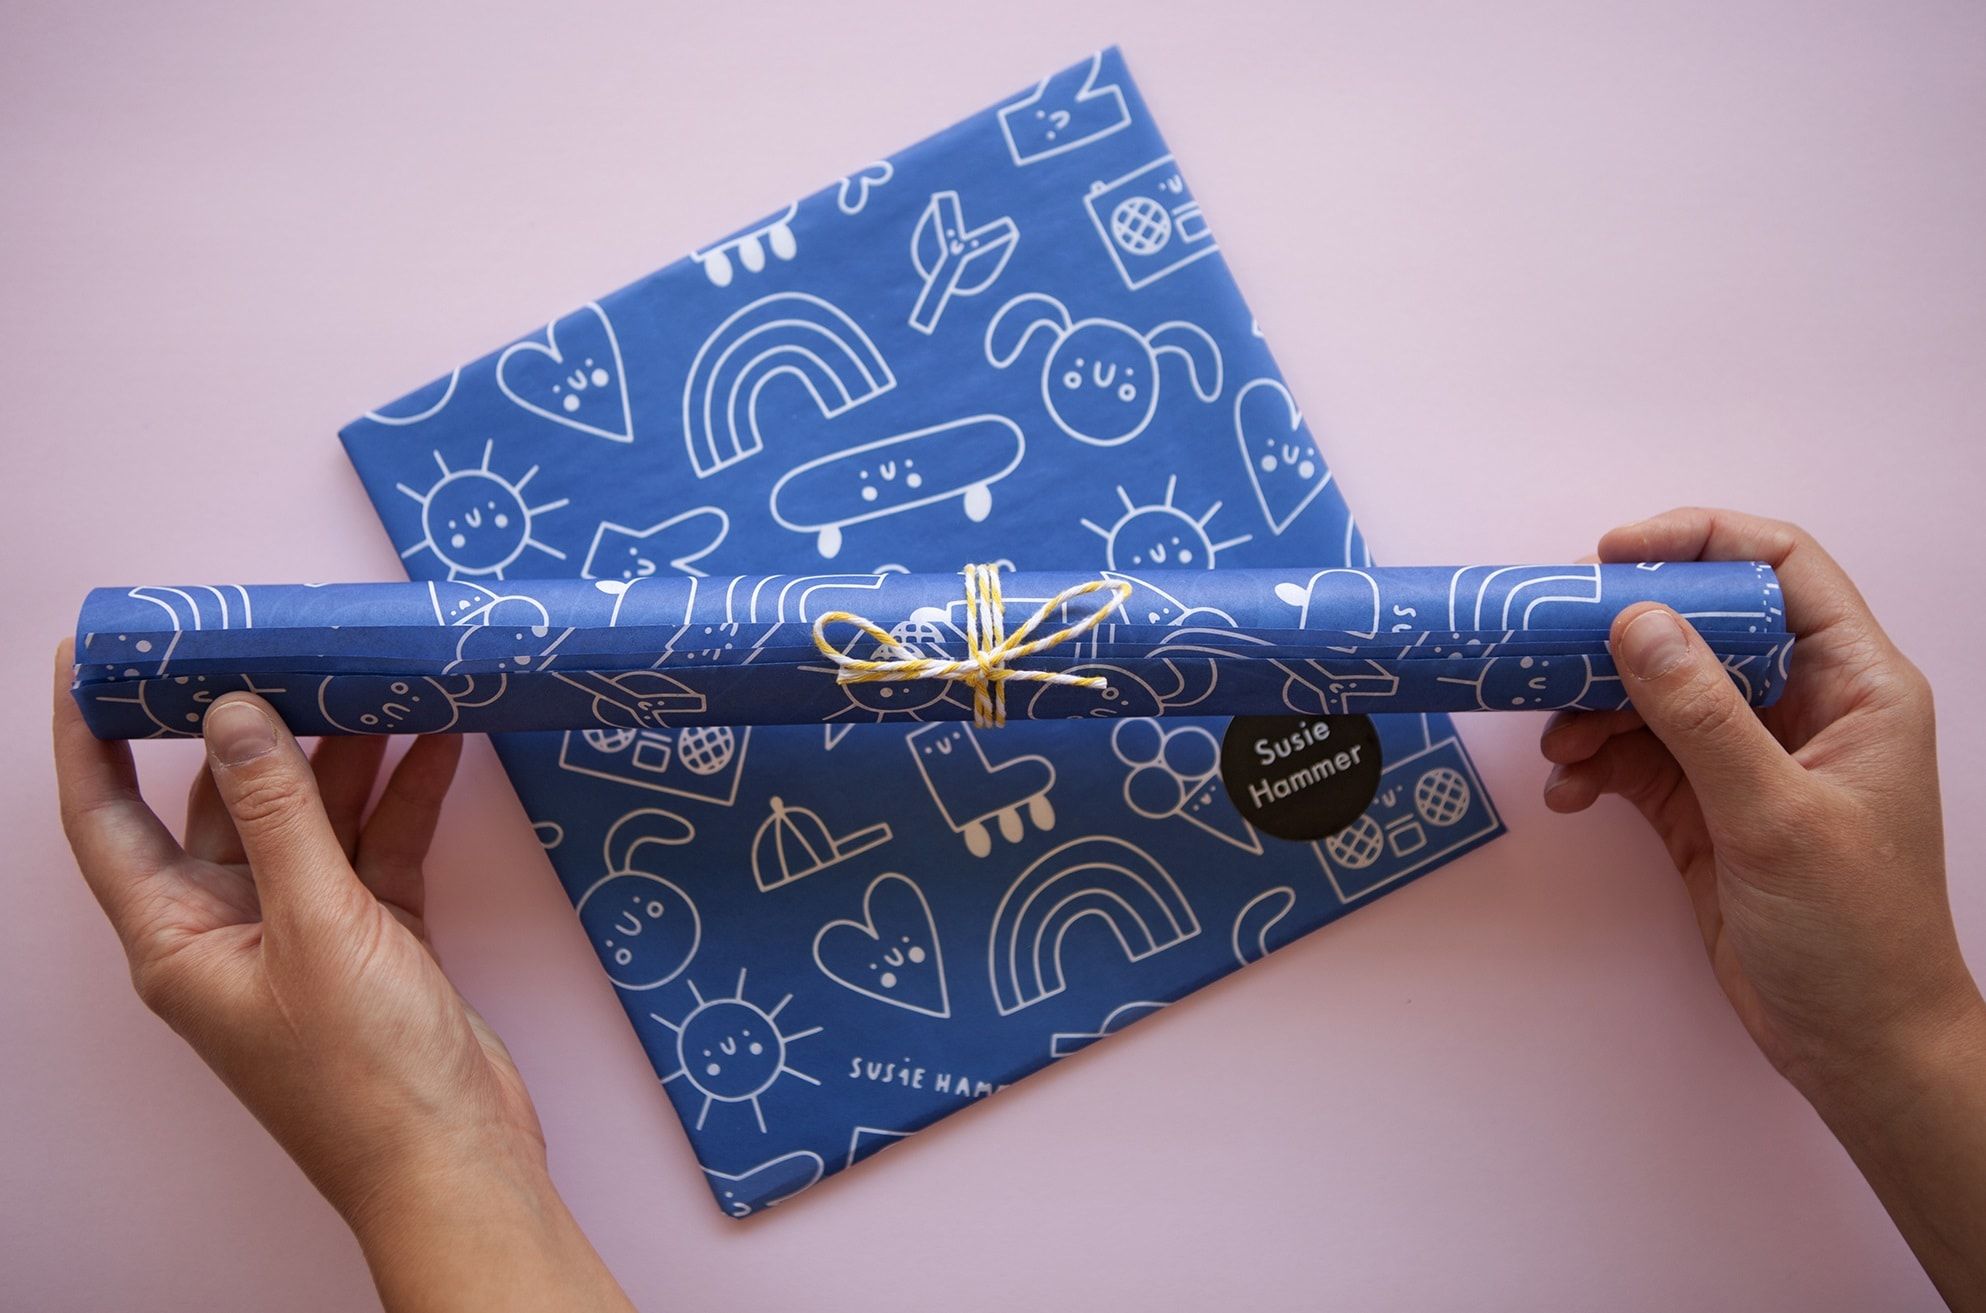 The art of unboxing: Five companies with the best packaging experience